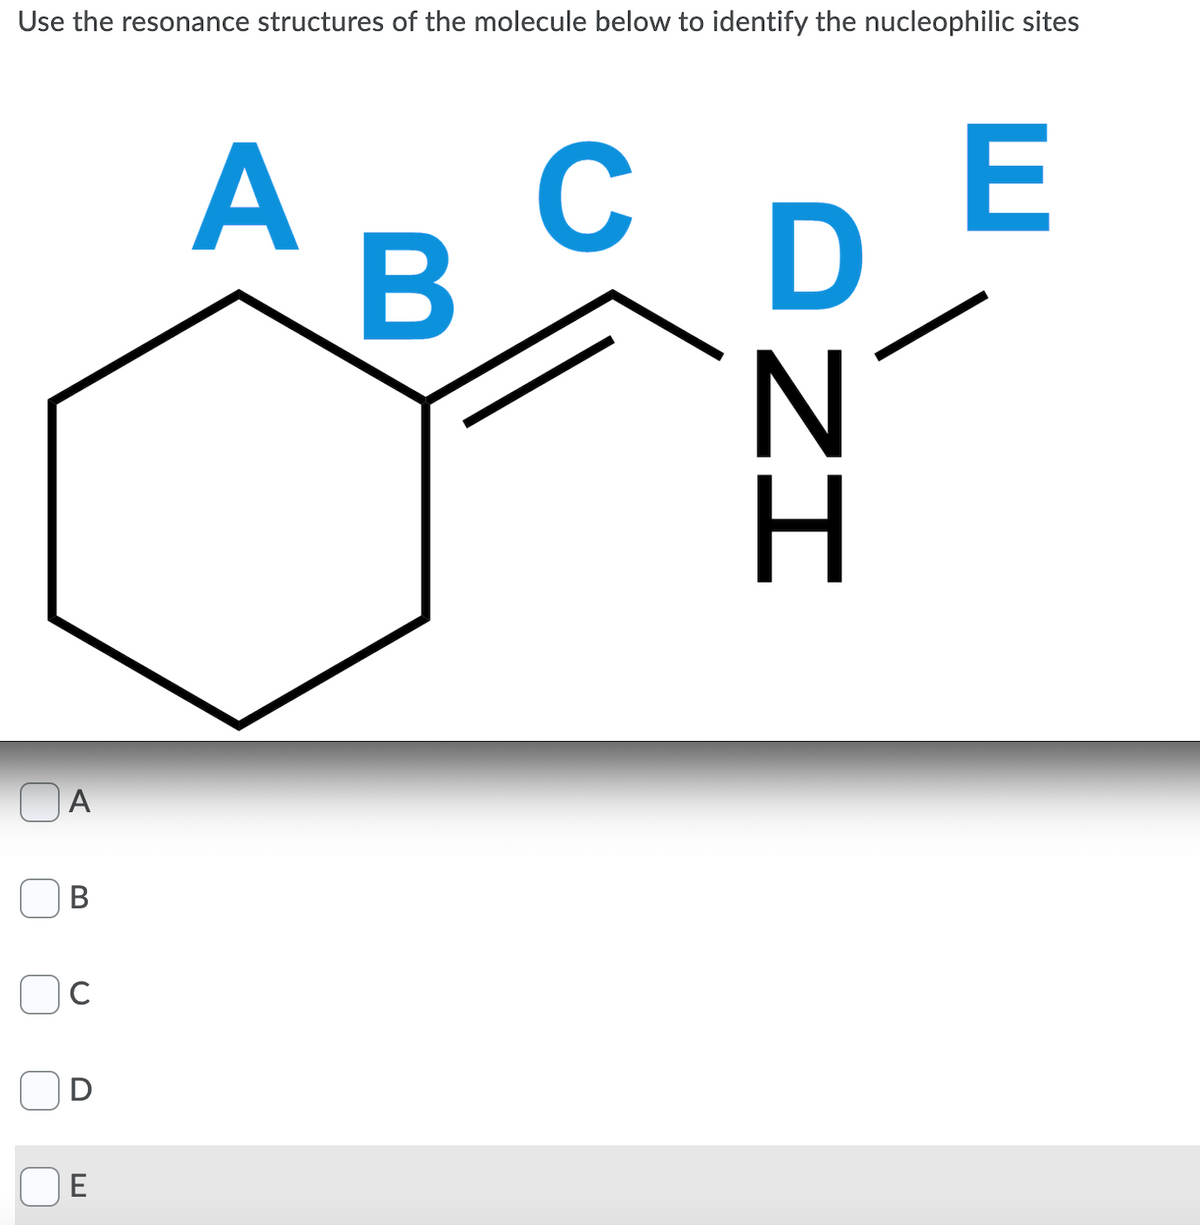 Use the resonance structures of the molecule below to identify the nucleophilic sites
A
C
E
A
В
D
E
DNH
